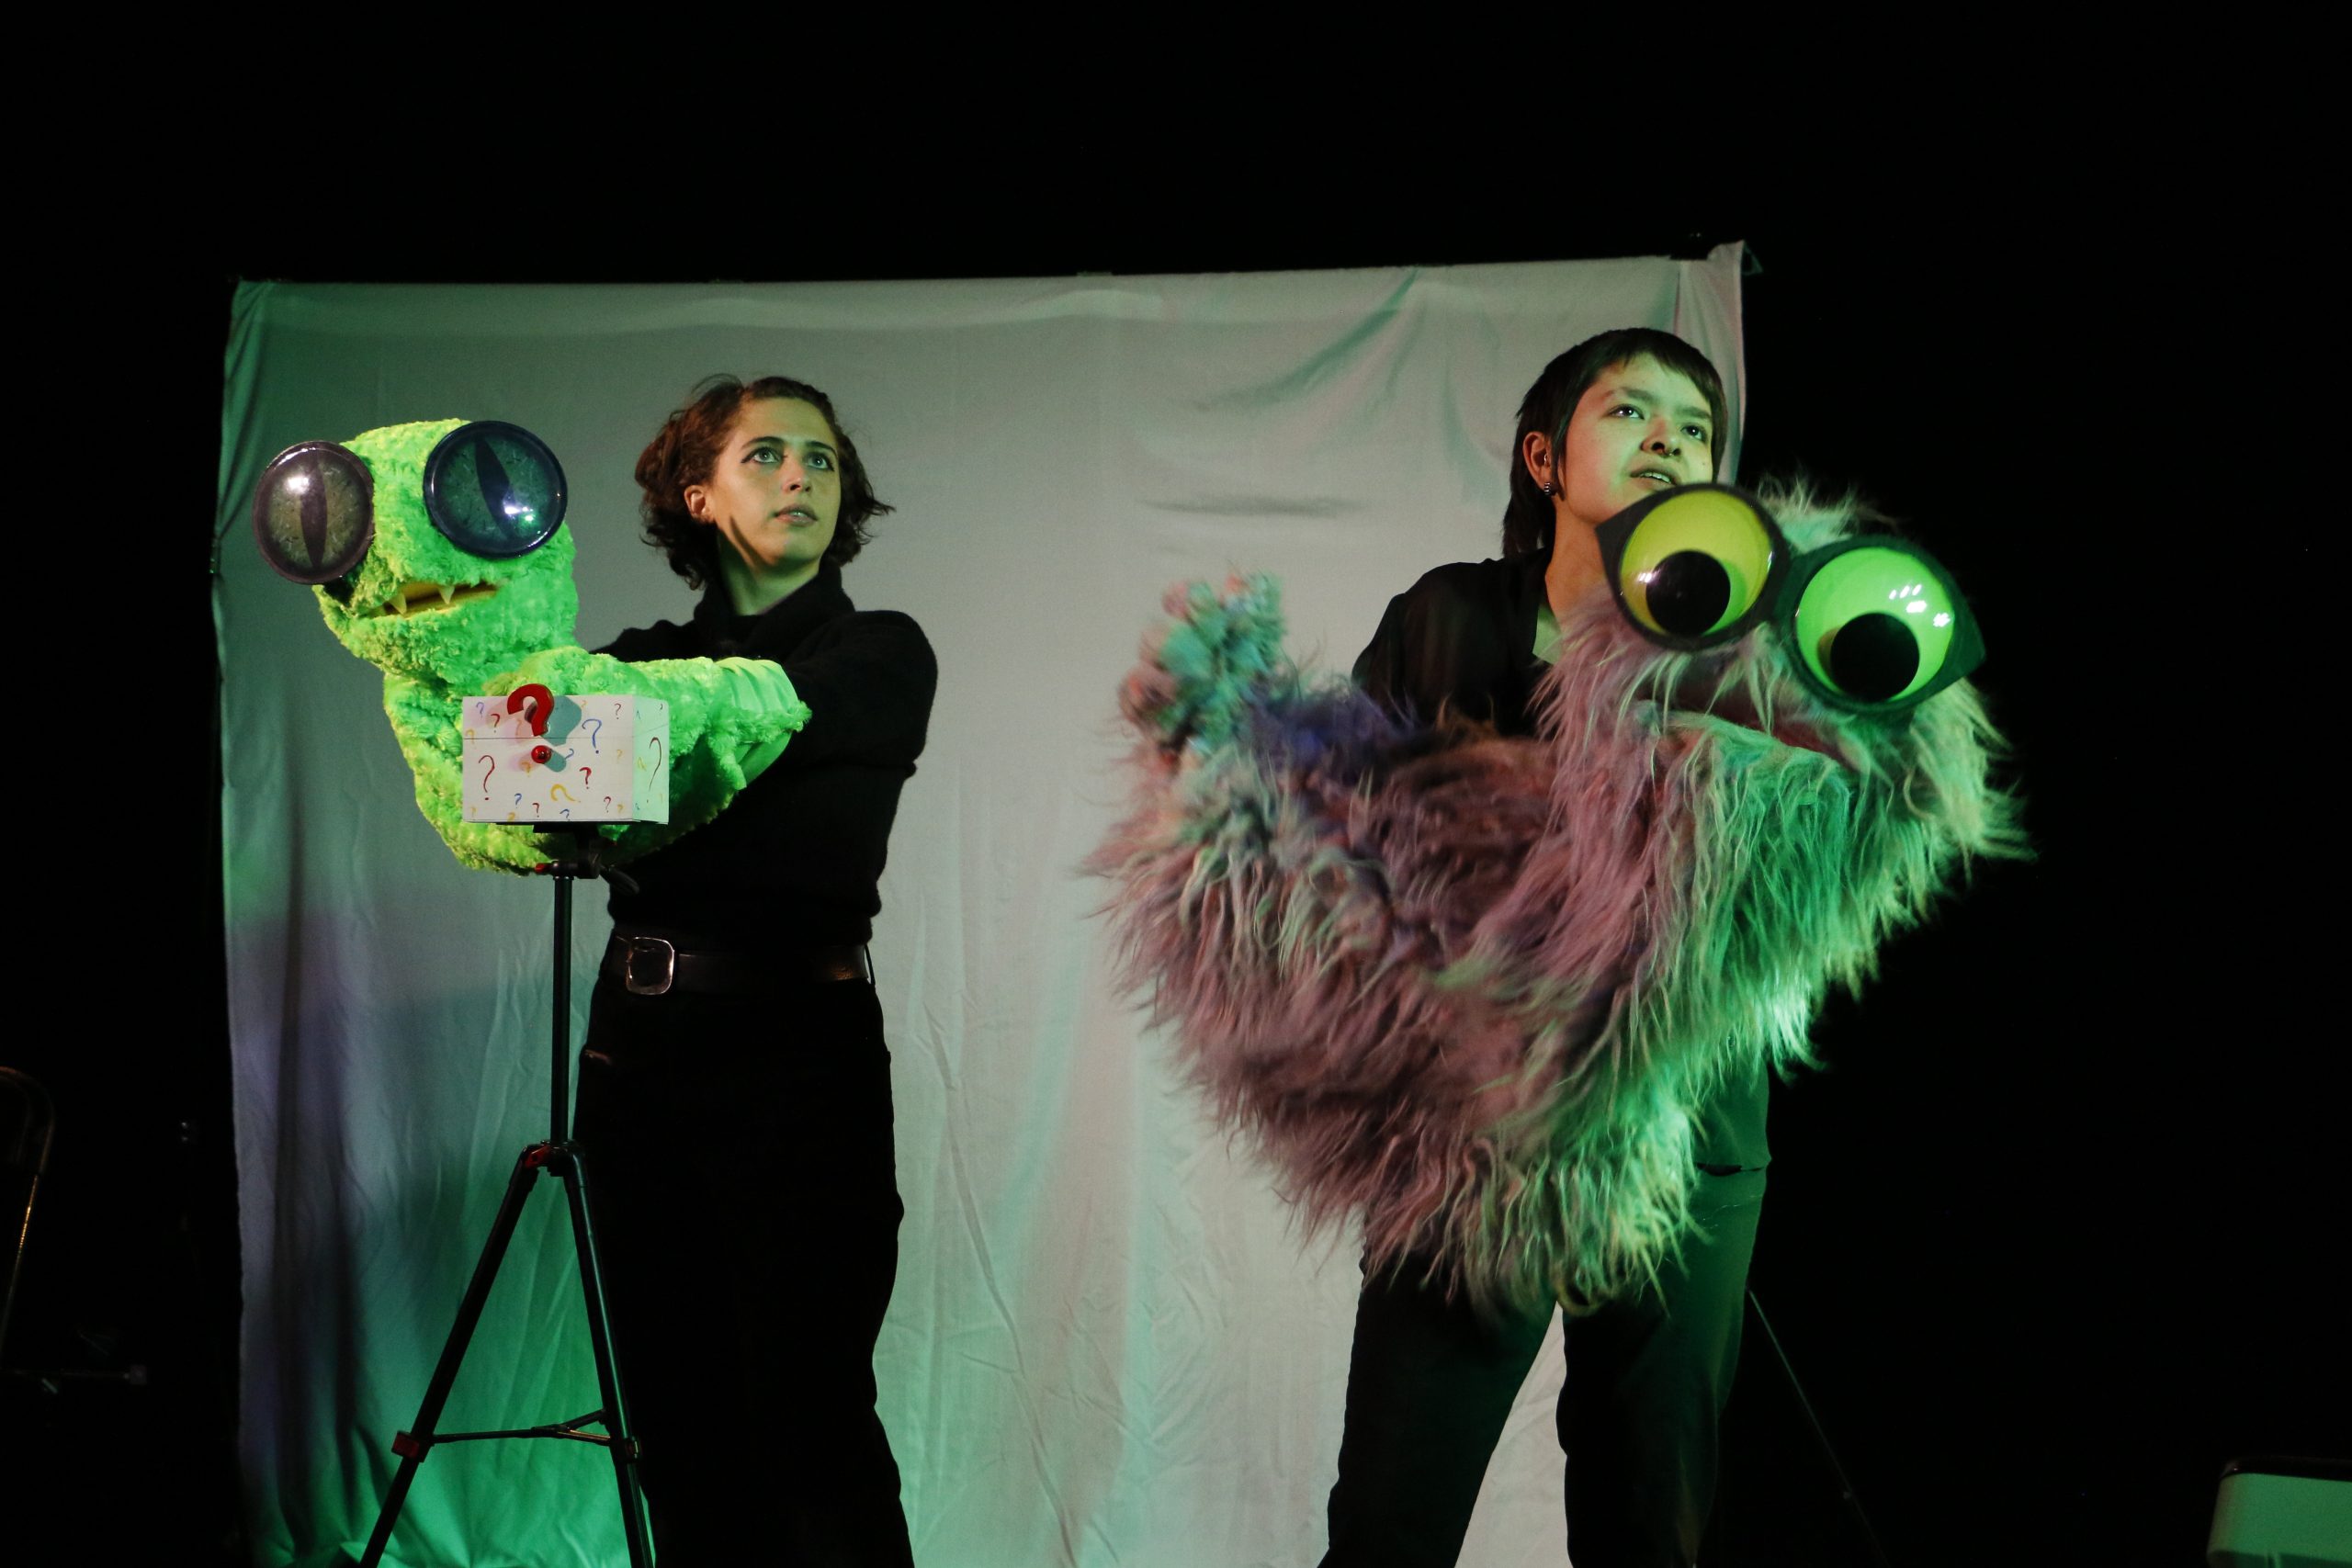 Photo of Loreto and Ty holding the puppets Chlamydia and Gonorrhea in the middle of a scene.